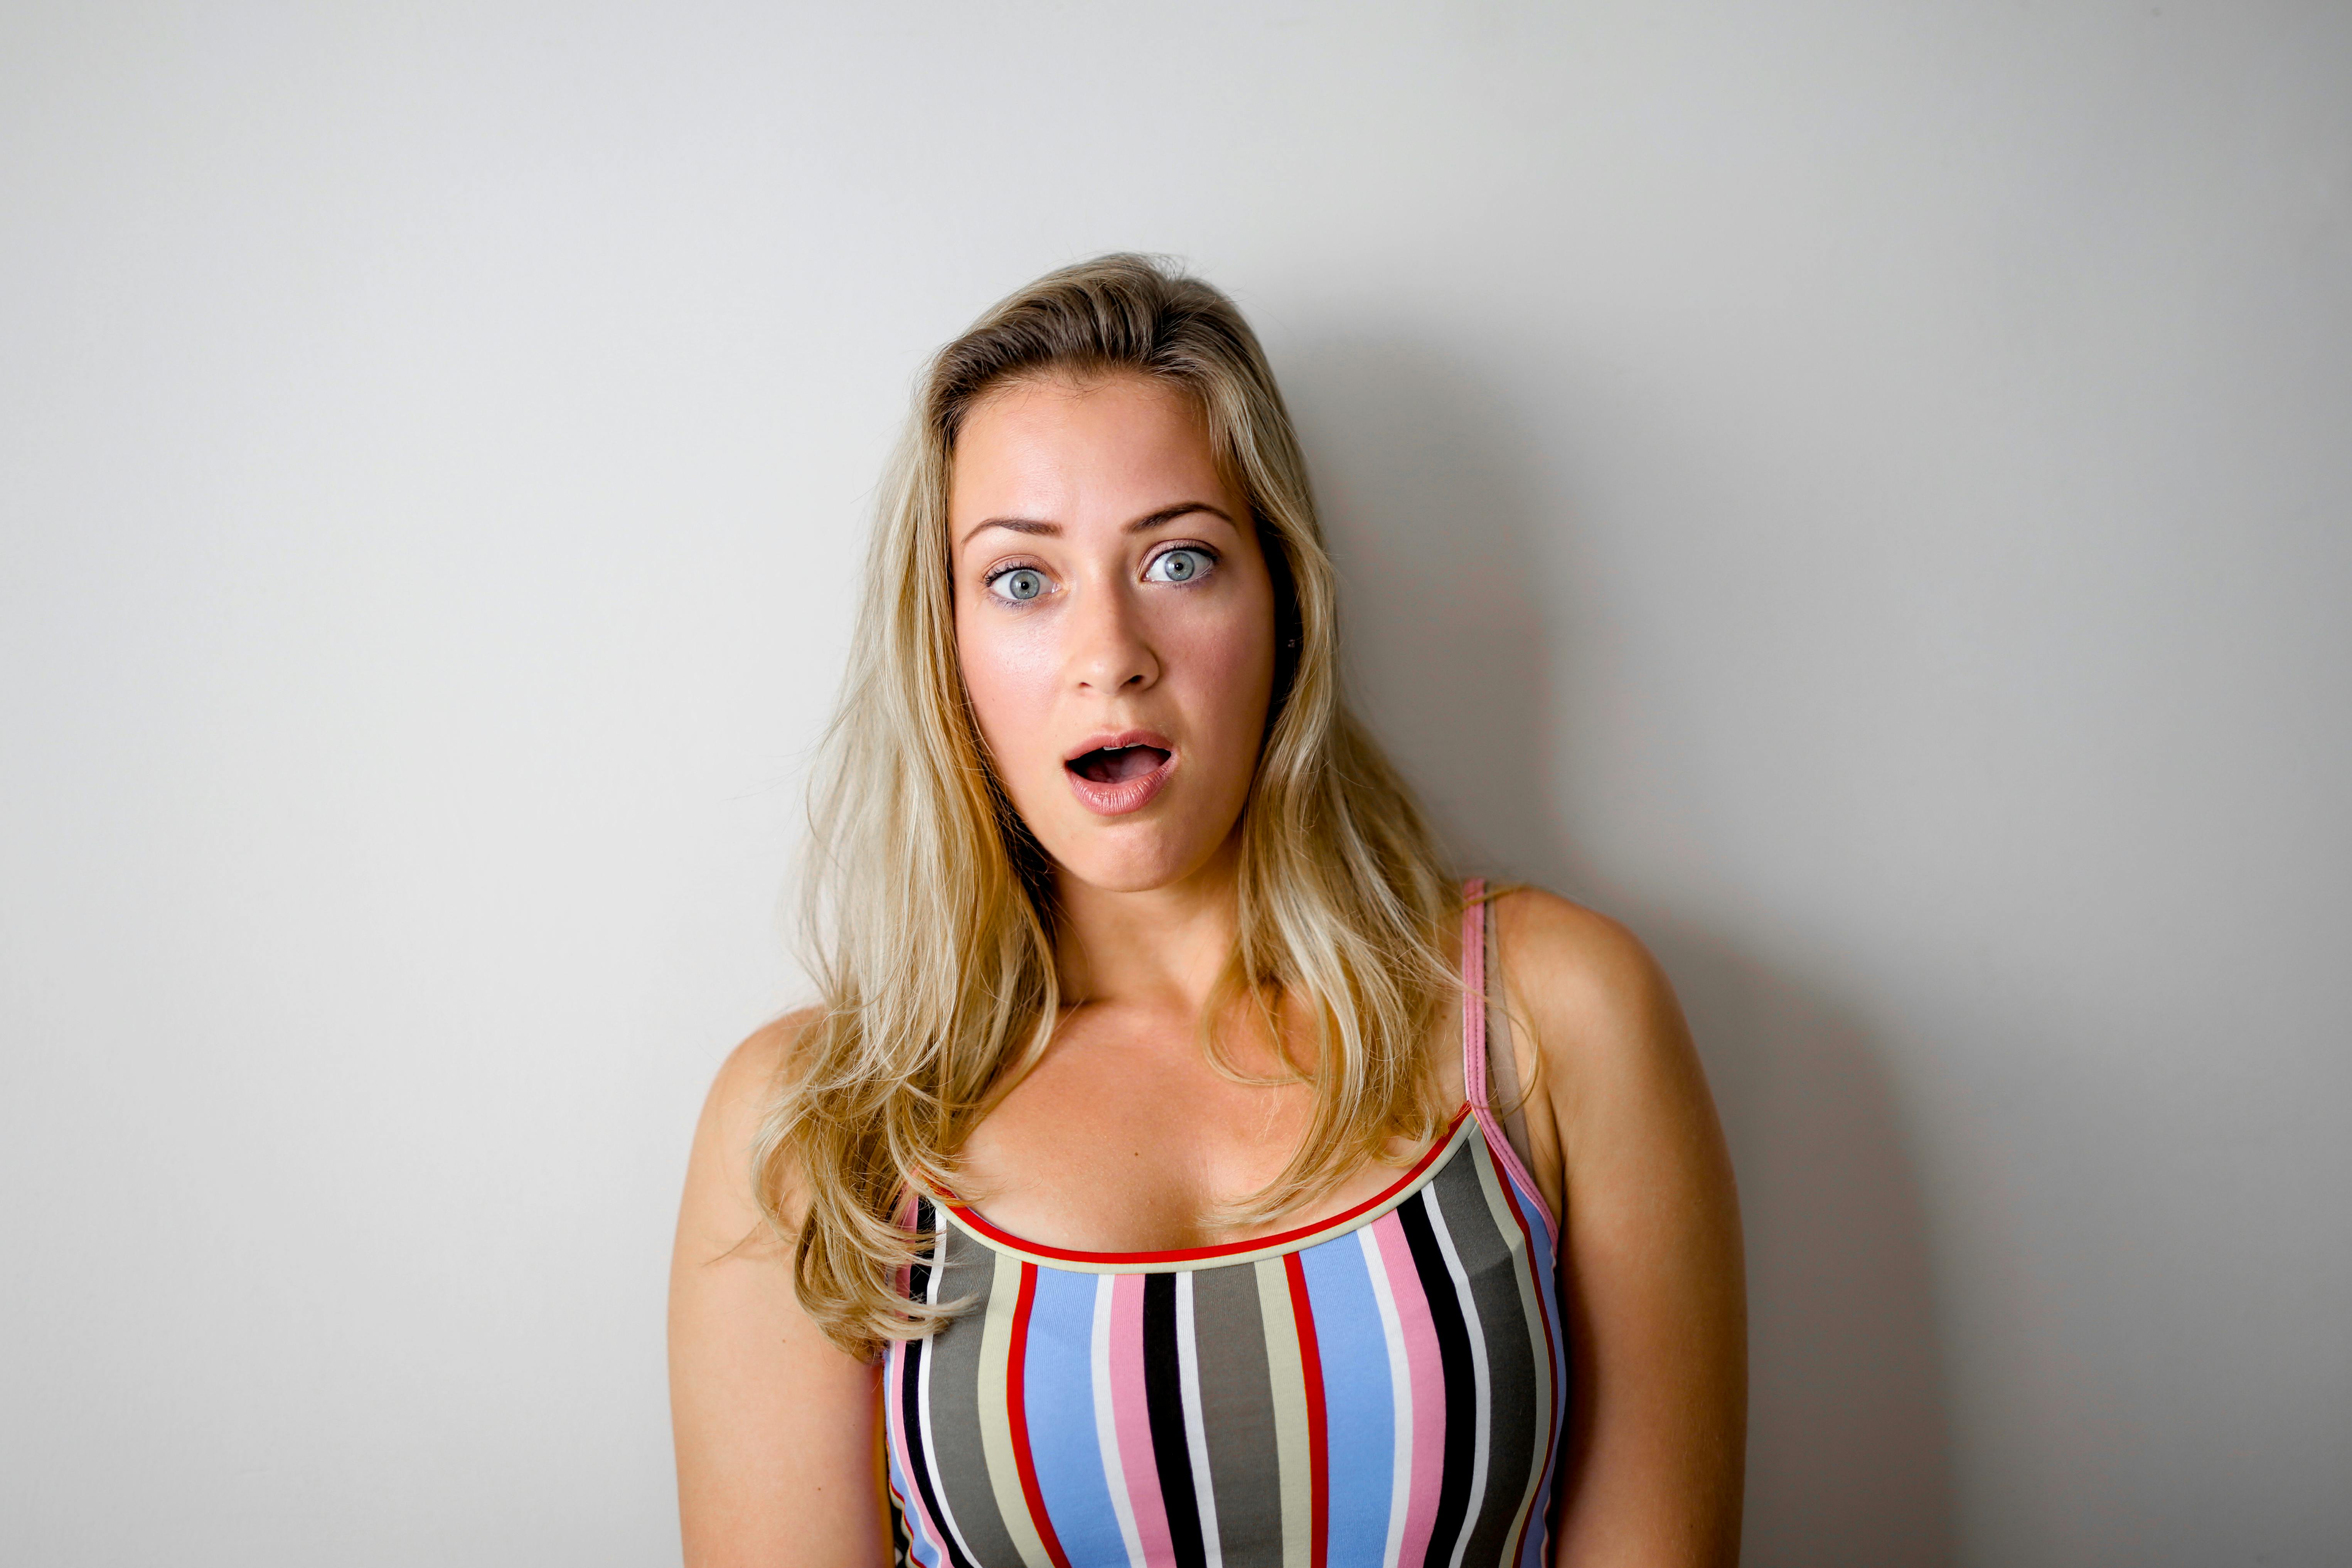 A woman with a shocked expression | Source: Pexels